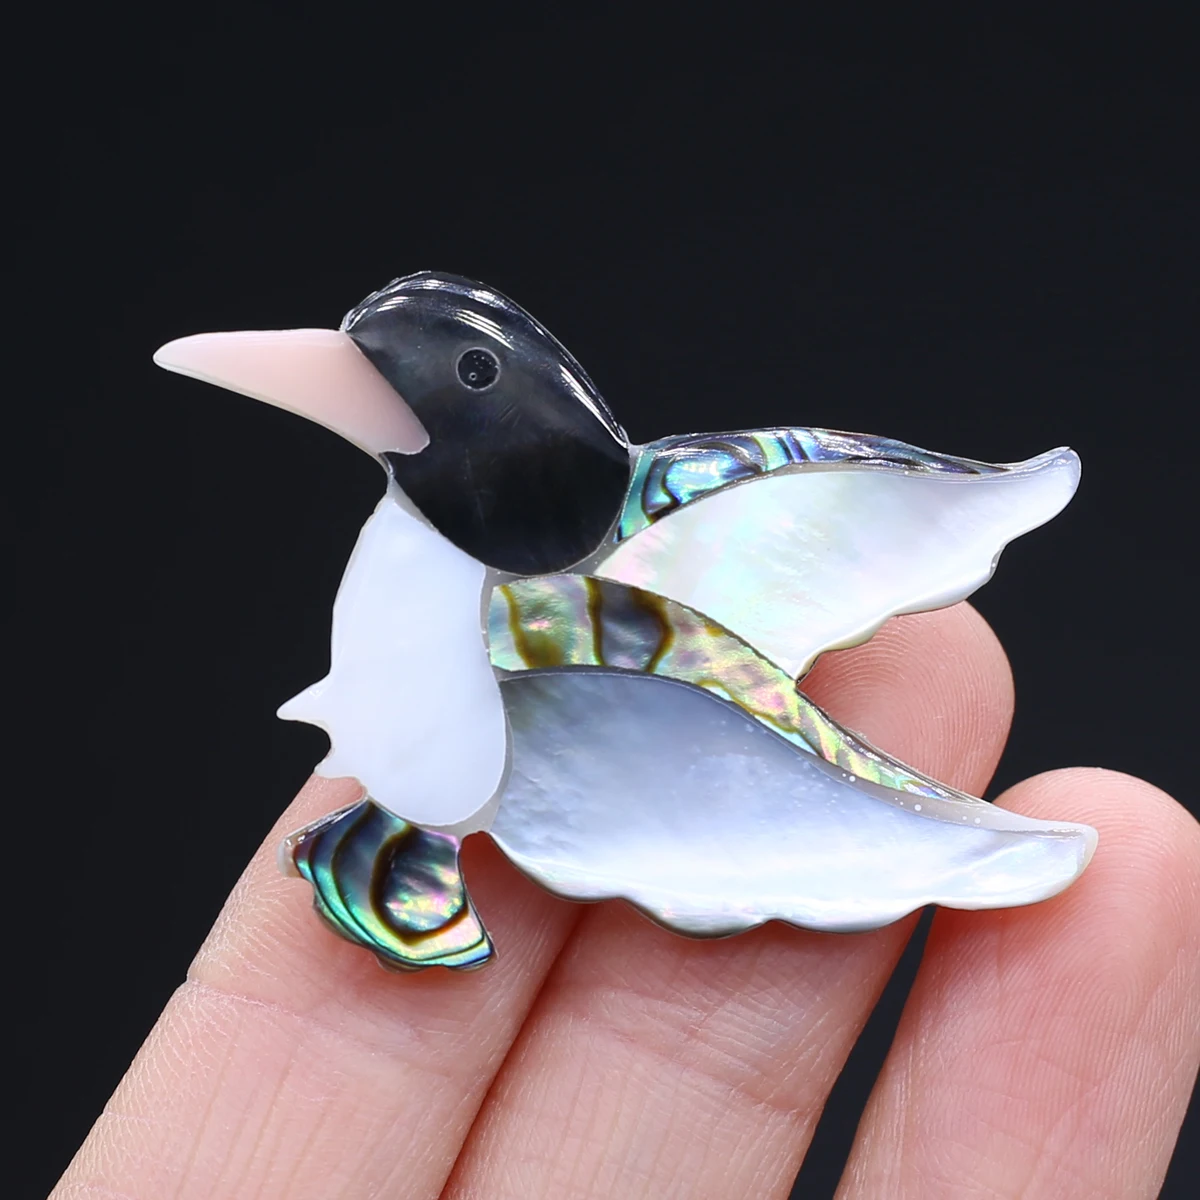 

Women Brooch Pin Natural Shell Birds-Shaped Brooches For Jewelry Making DIY Necklace Wedding Accessory Droppshing